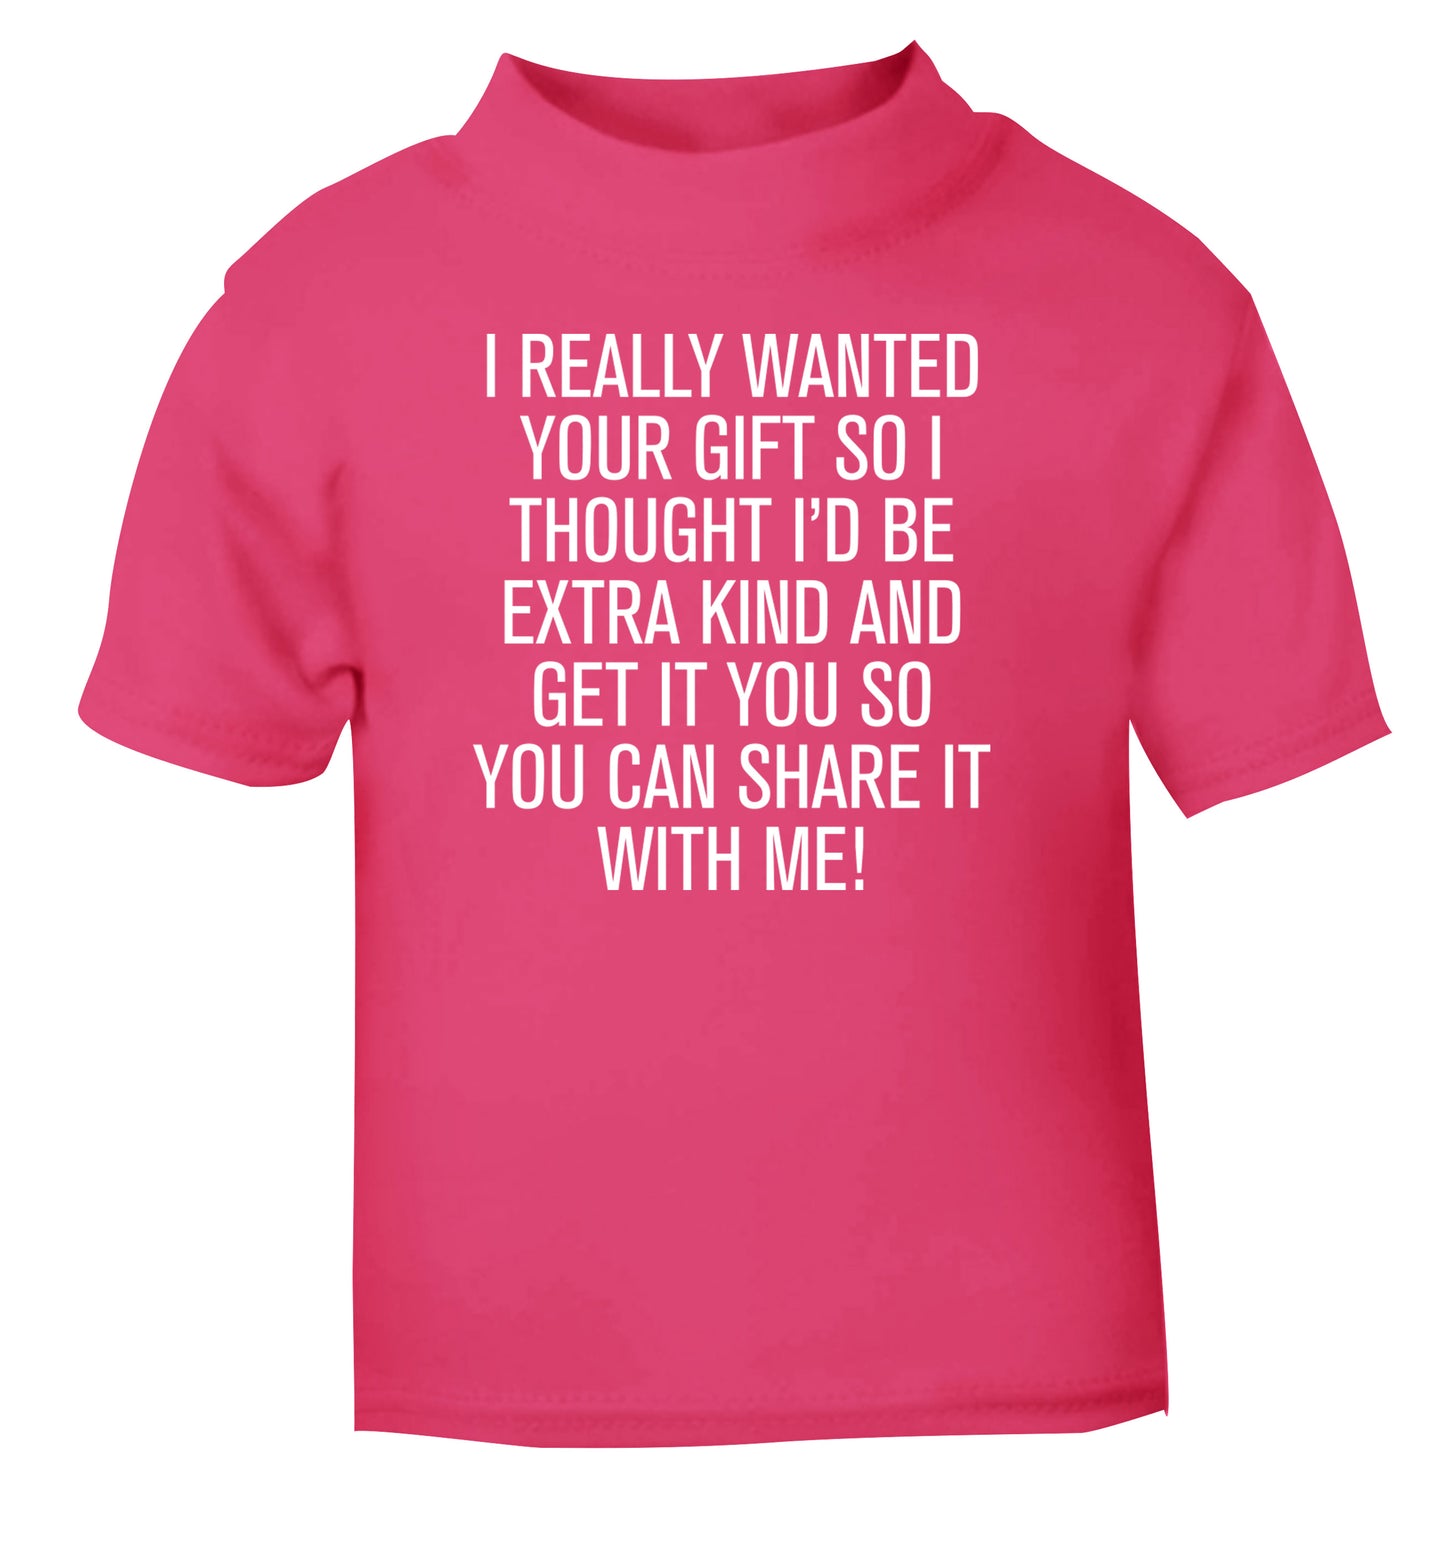 I really wanted your gift pink Baby Toddler Tshirt 2 Years